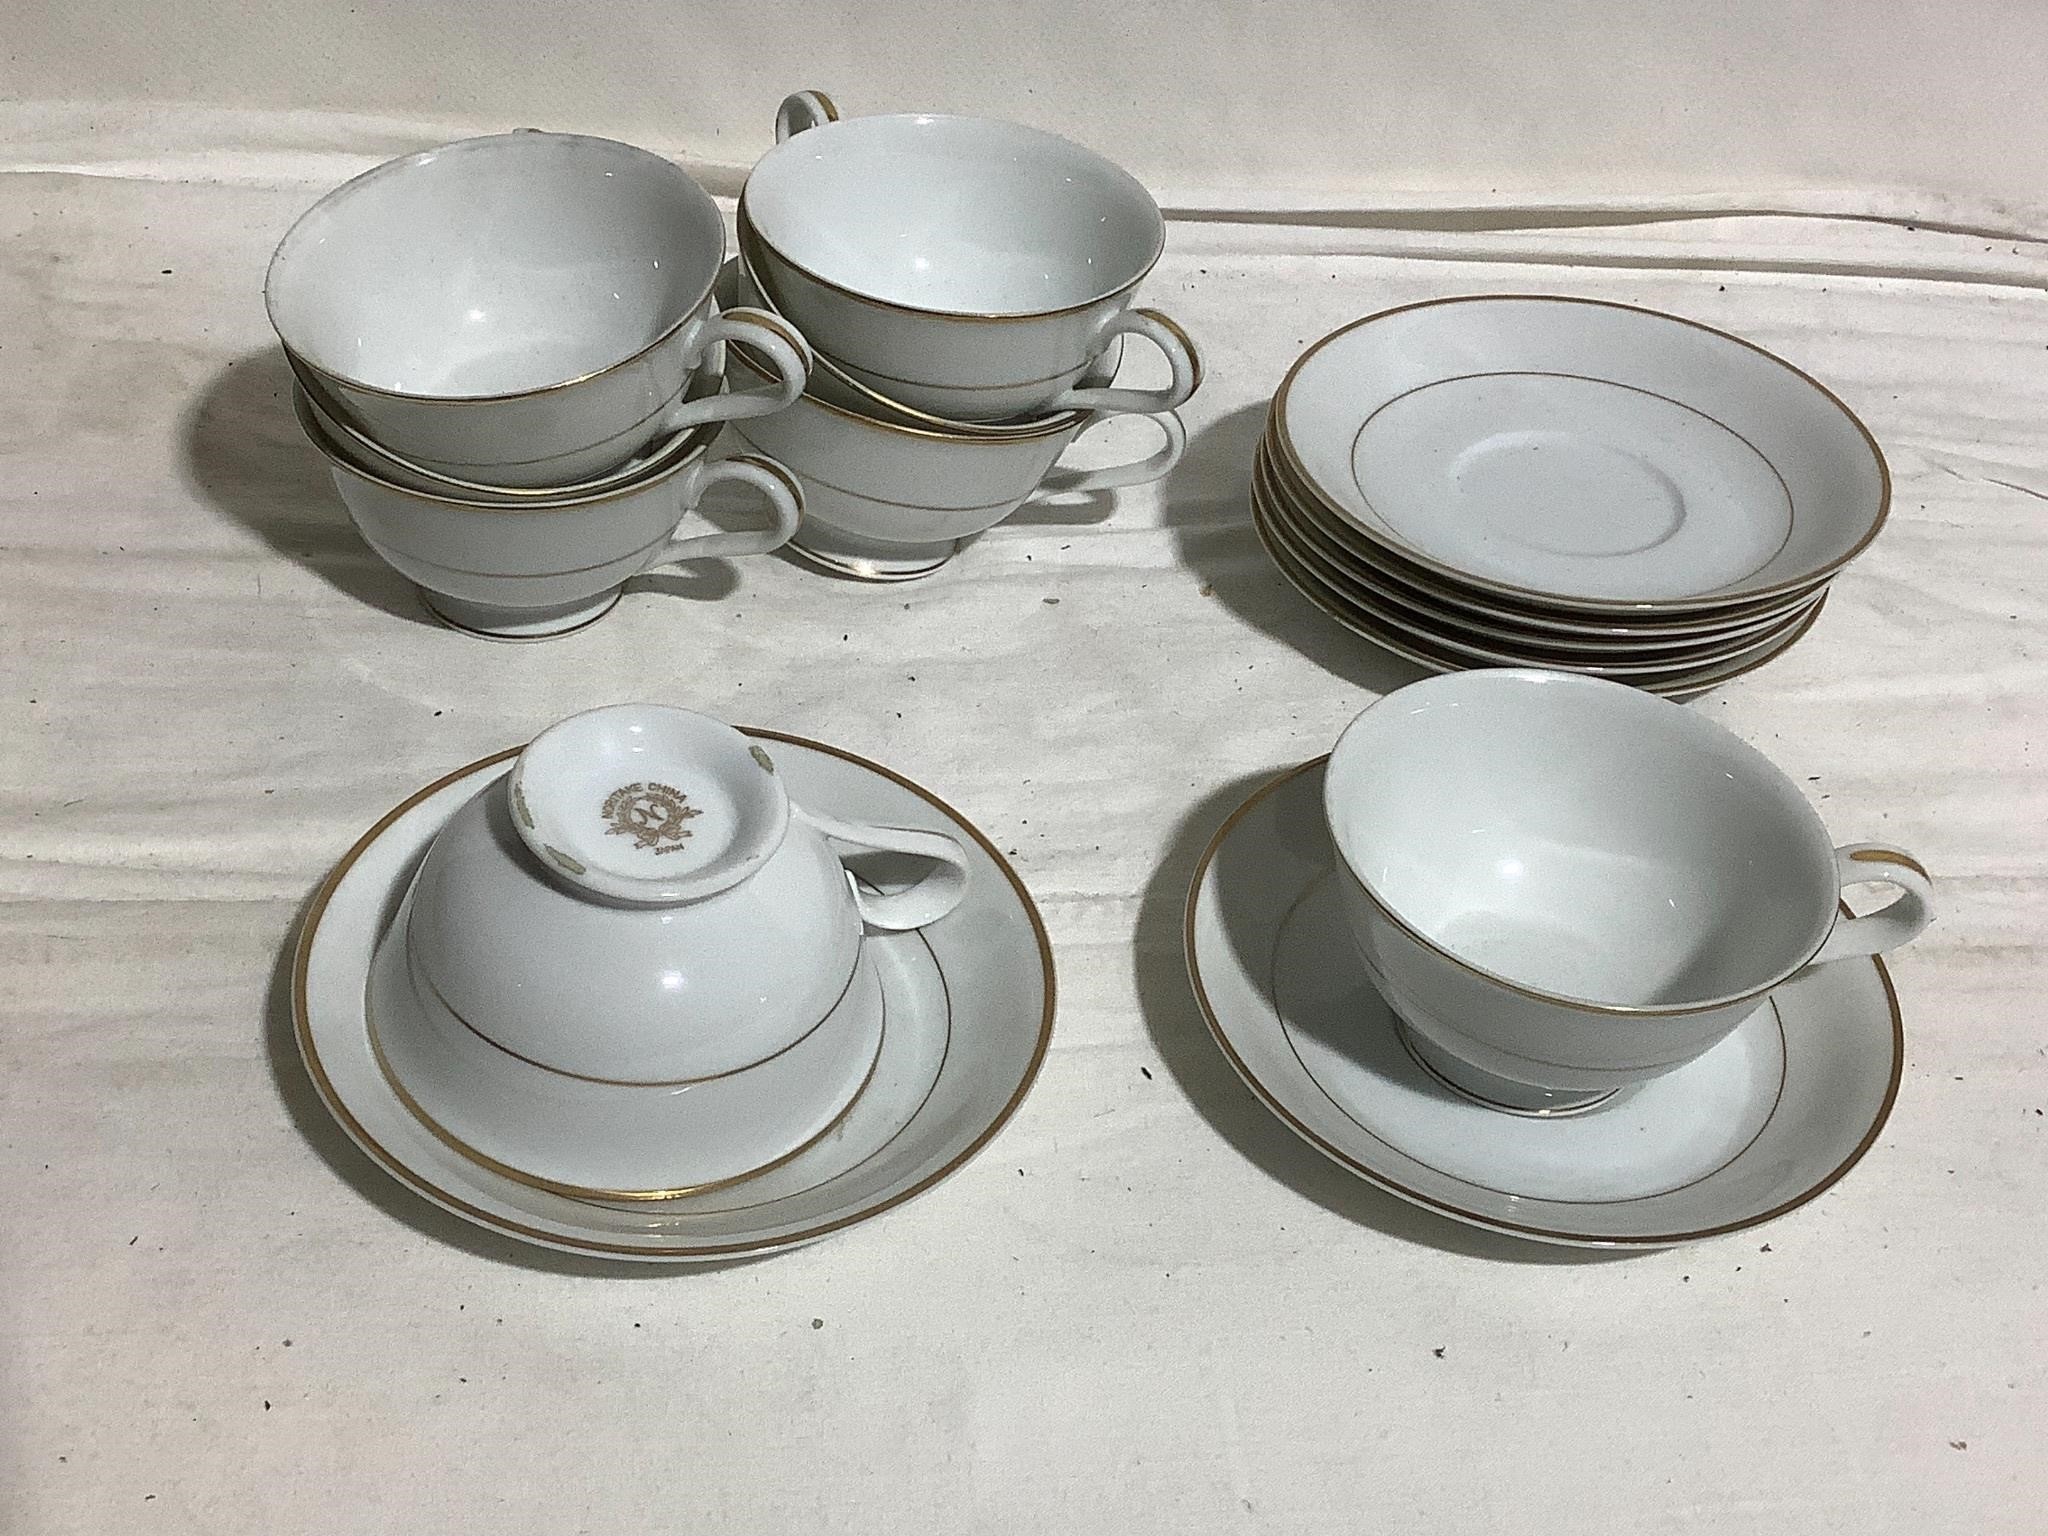 Noritake China Cups and Saucers Gold Rim